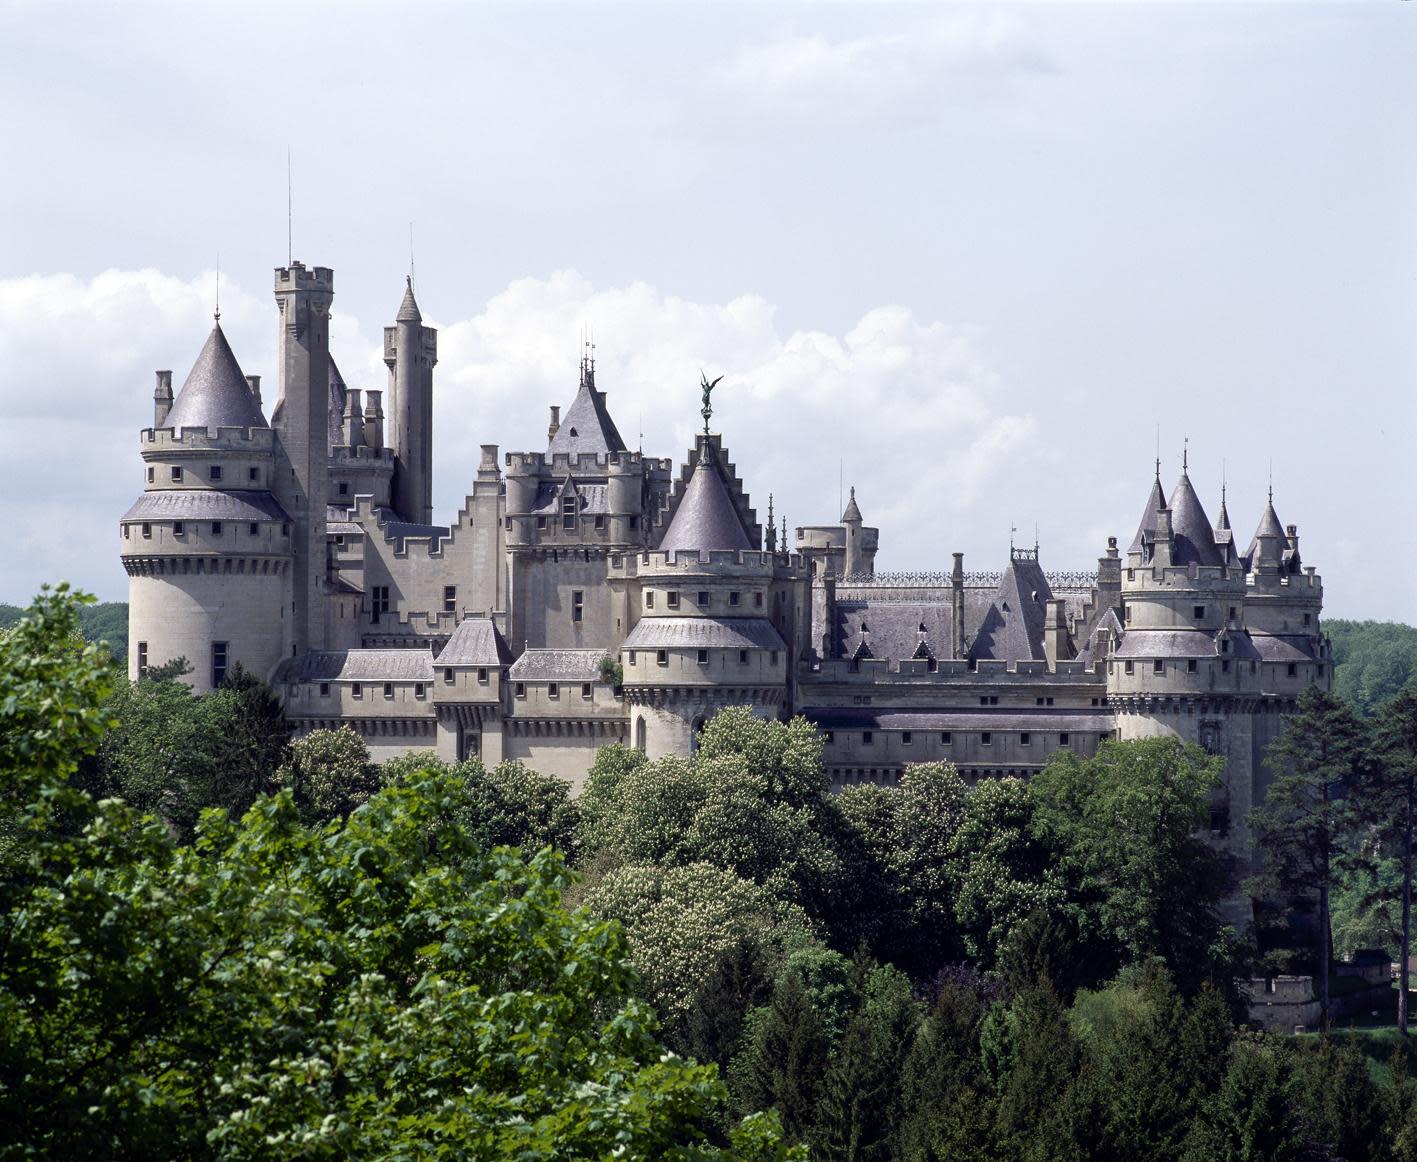 A distant view of the The fairytale Chateau de Pierrefonds surrounded by a forest